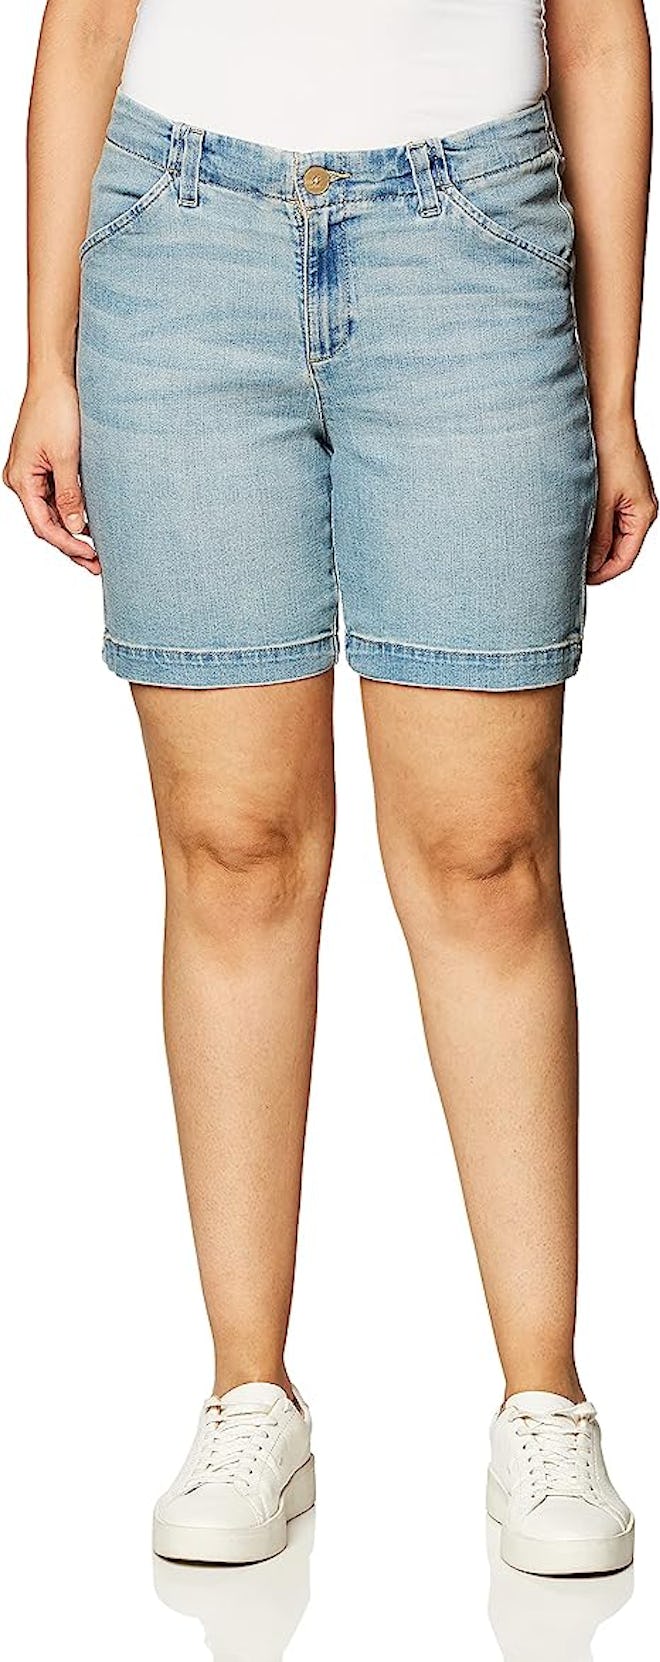 These mid-thigh denim shorts for big thighs also come in dressier chino versions.